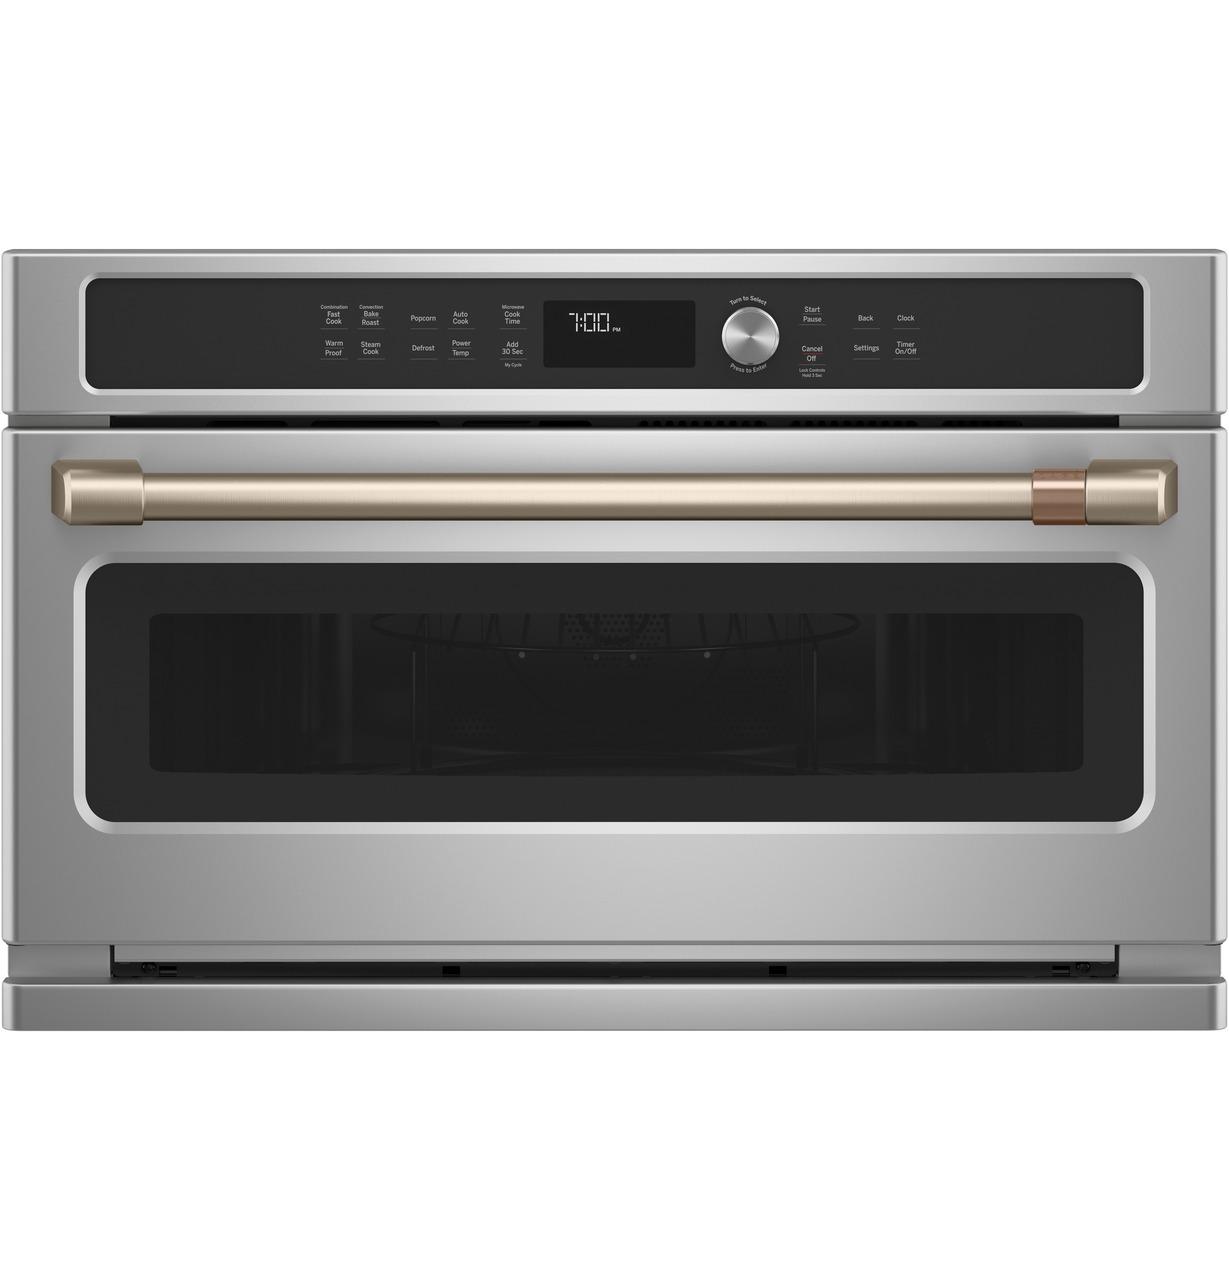 Cafe Caf(eback)™ Built-In Microwave/Convection Oven